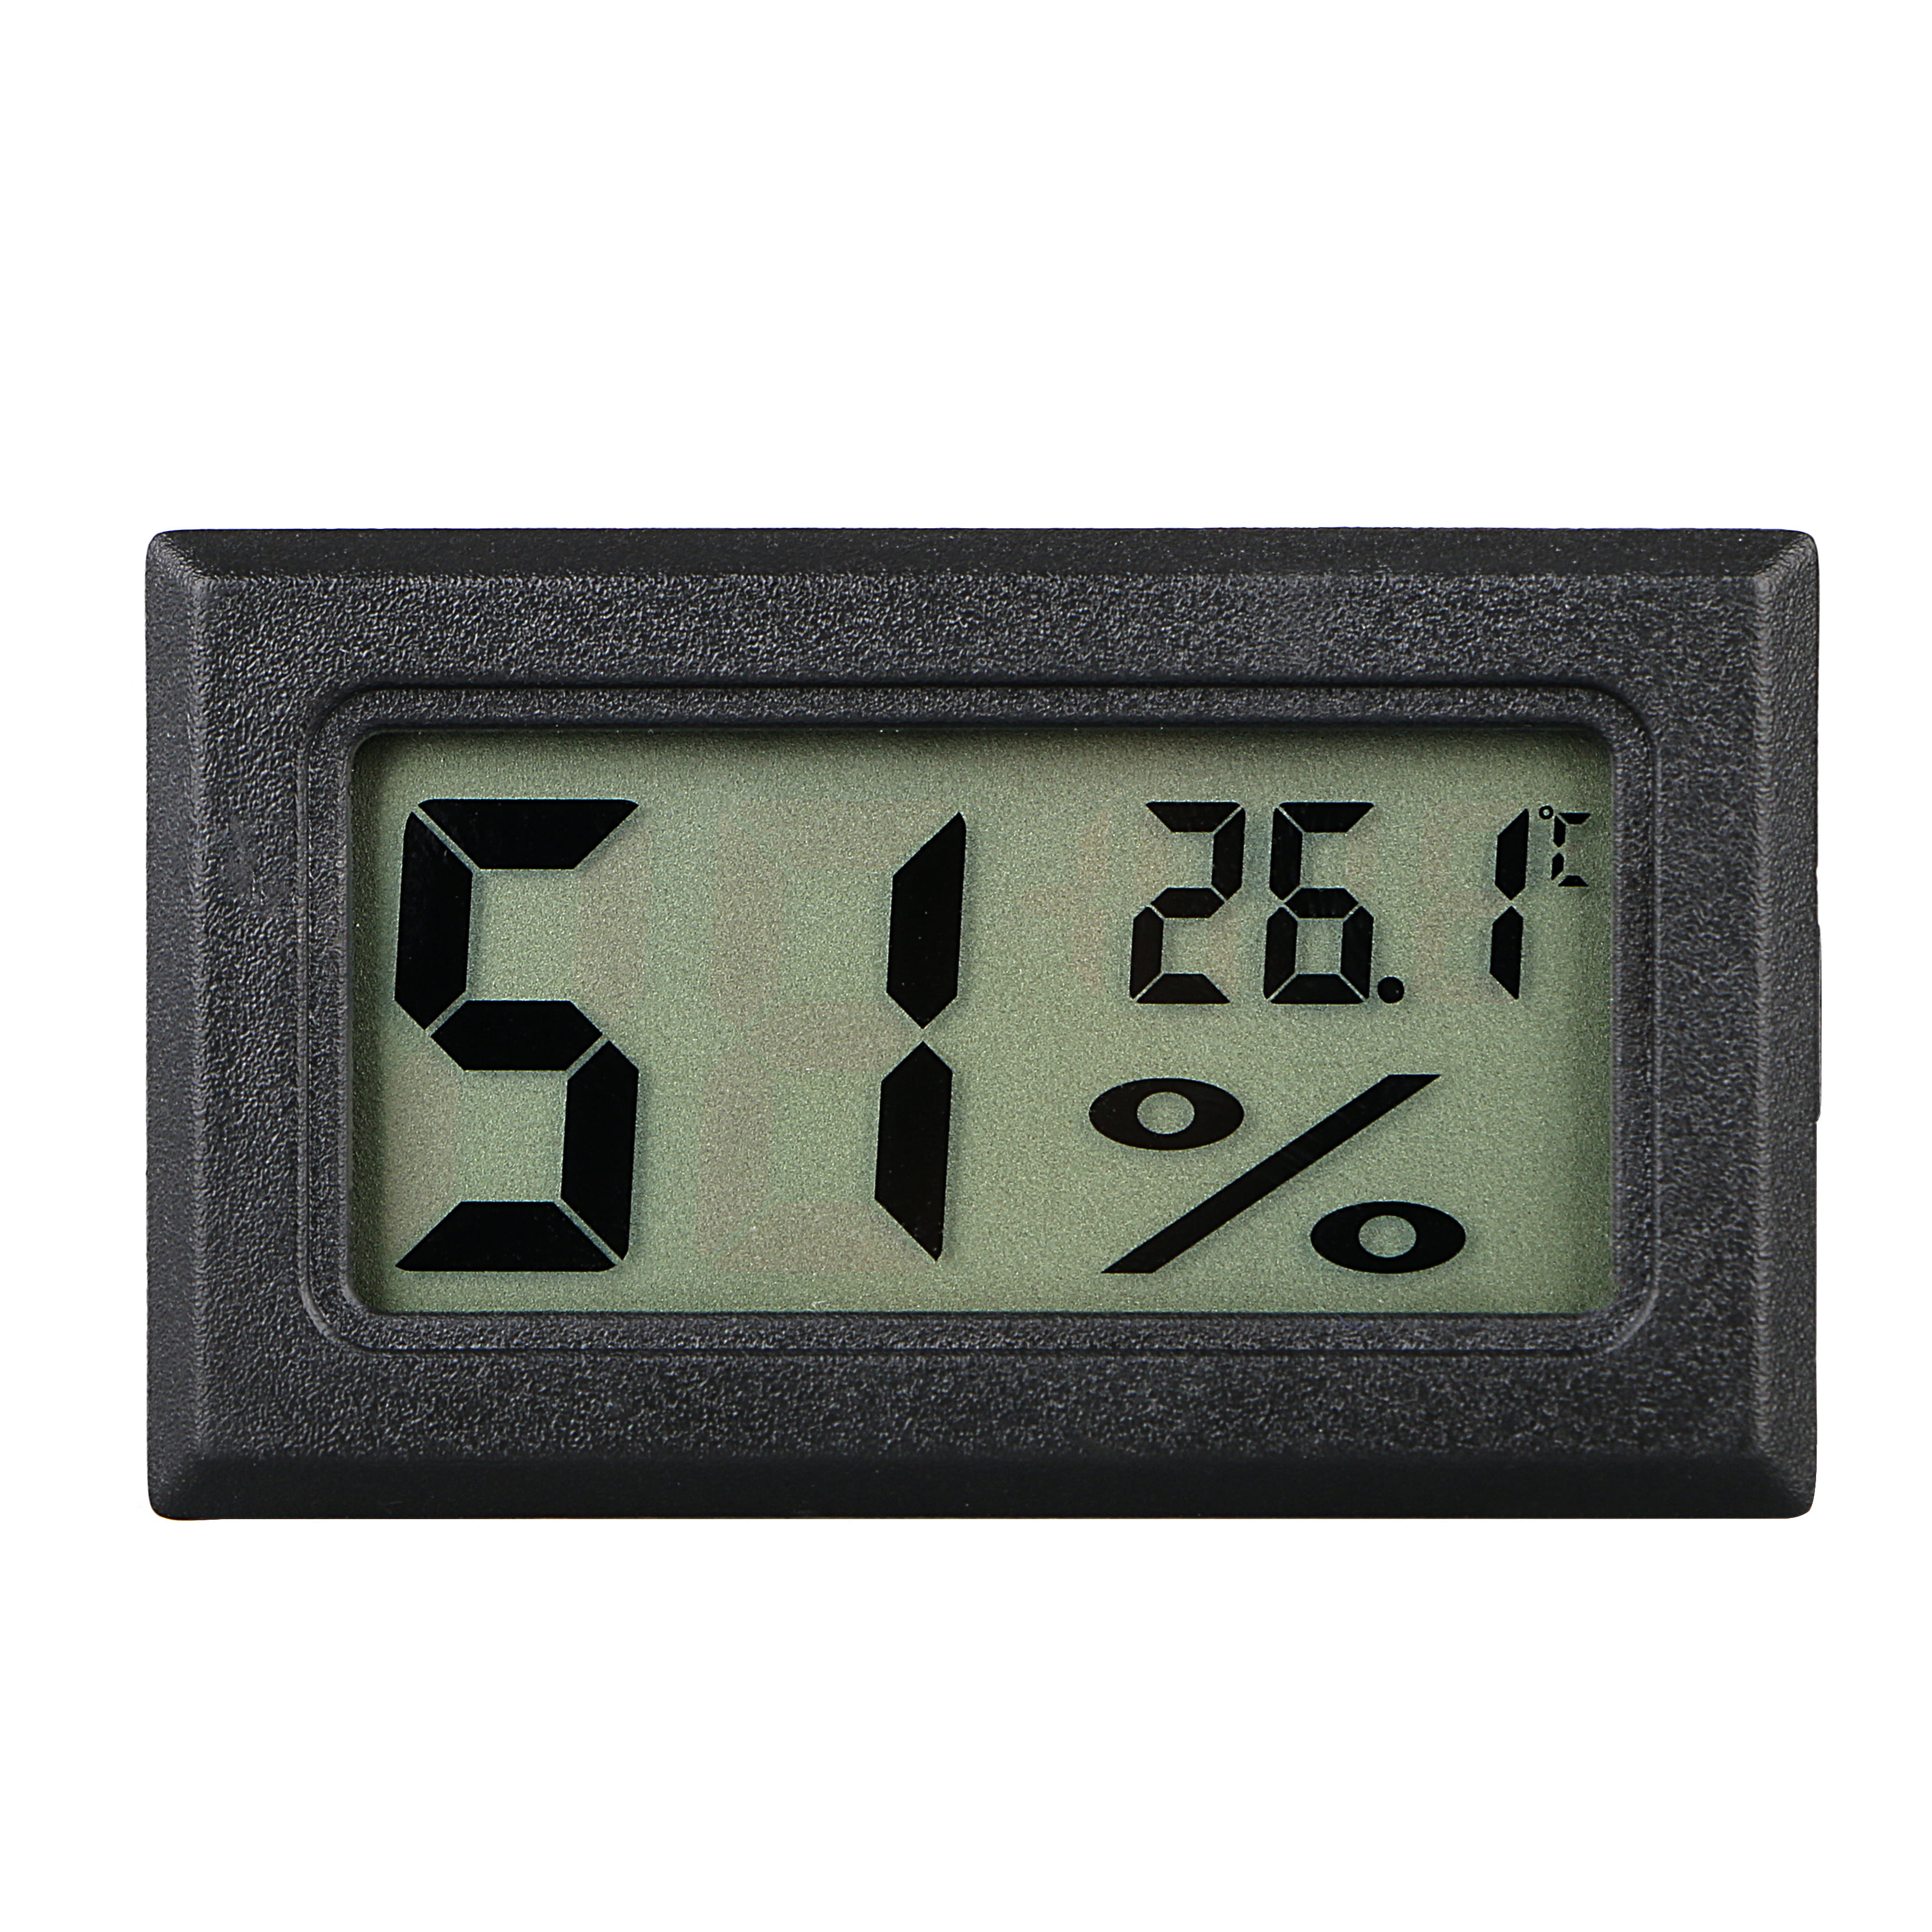 NEW Digital LCD Thermometer Hygrometer Humidity Indoor Temperature Meter 